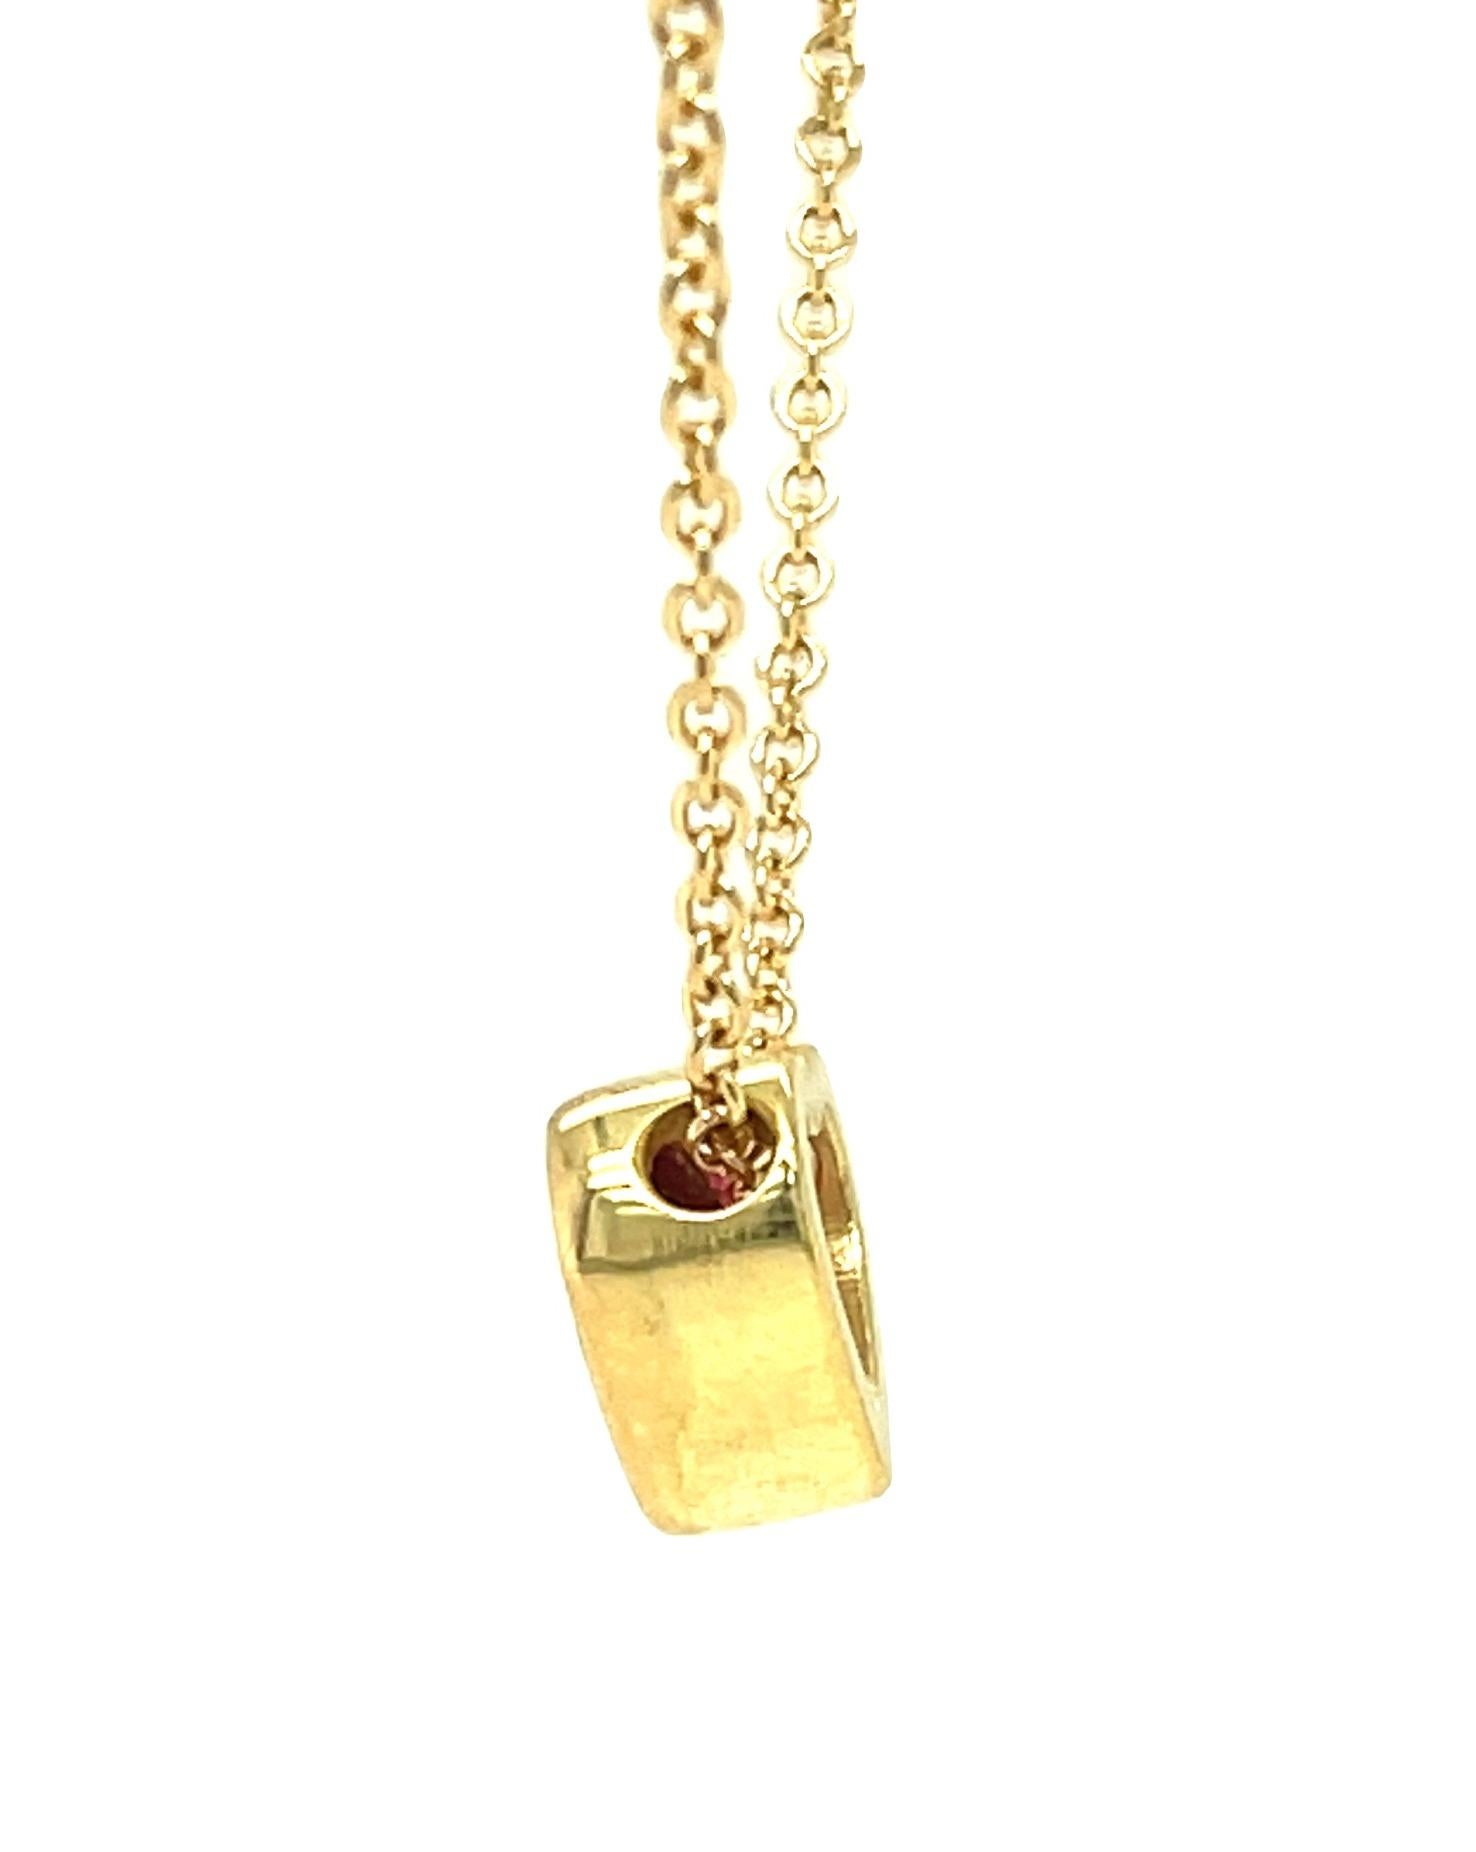 1.99 Carat Heart Shaped Pink Rubellite Tourmaline Necklace in 18k Yellow Gold In New Condition For Sale In Los Angeles, CA